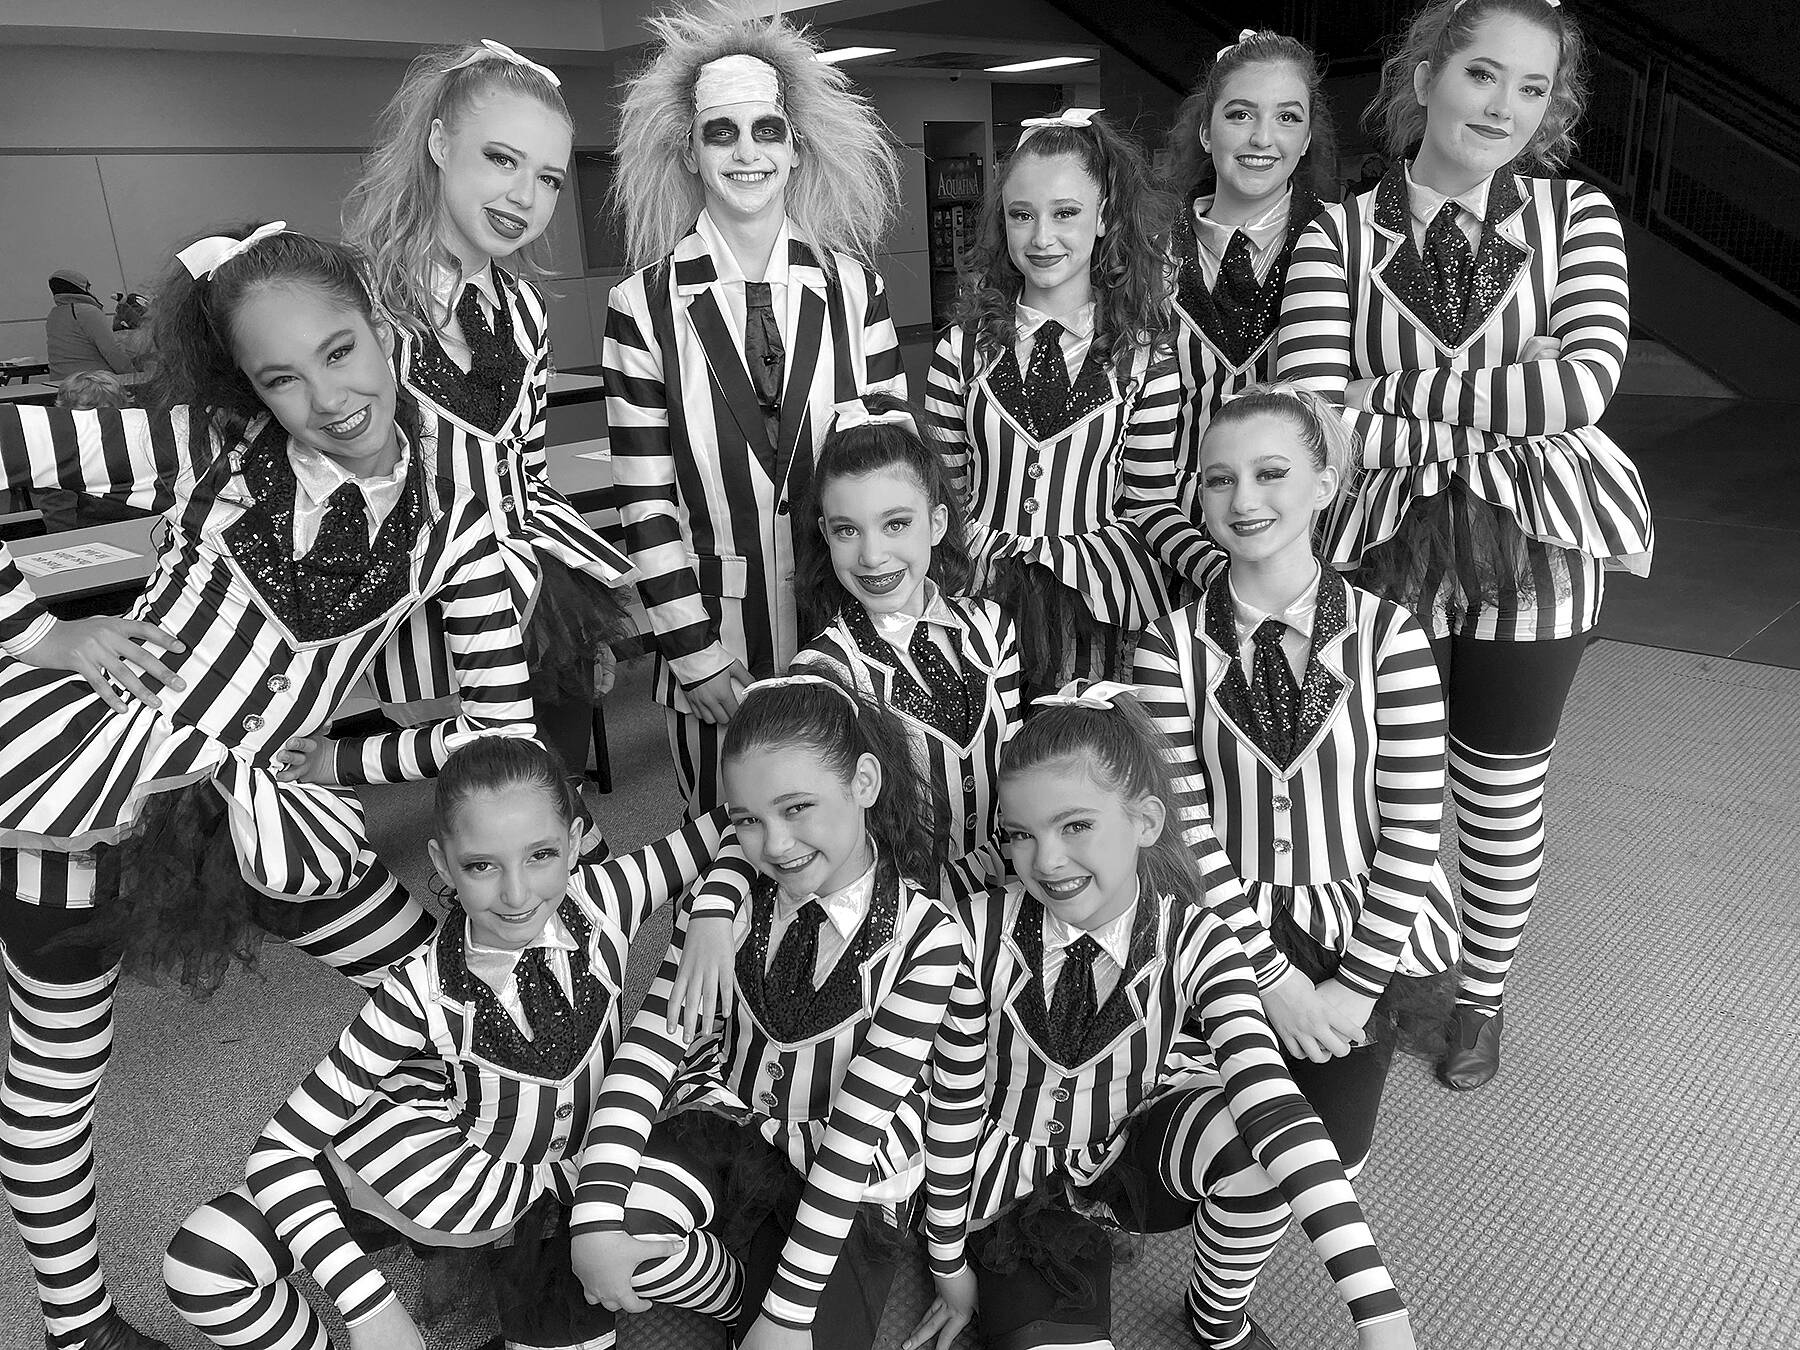 Submitted photo
The Elite Competition Dance Team from The Dance Center by Erica Edwards in Sequim recently earned a Judge’s Choice award and an invitation to perform in New York City for their musical theater large group routine “Beetlejuice.” Team members include, in no particular order, Madison Edwards, Ayla Alstrup, Sofia Divinsky, Sydney Owens, Cyrus Deede, Eva Lancheros-Gillis, Joyce Caulfield, Ava Fuller, Emma Edwards, Mia Buhrer, Addysin Smith, Savanna DeRuyter, Tosca Kattau and Julianne Wilcox.